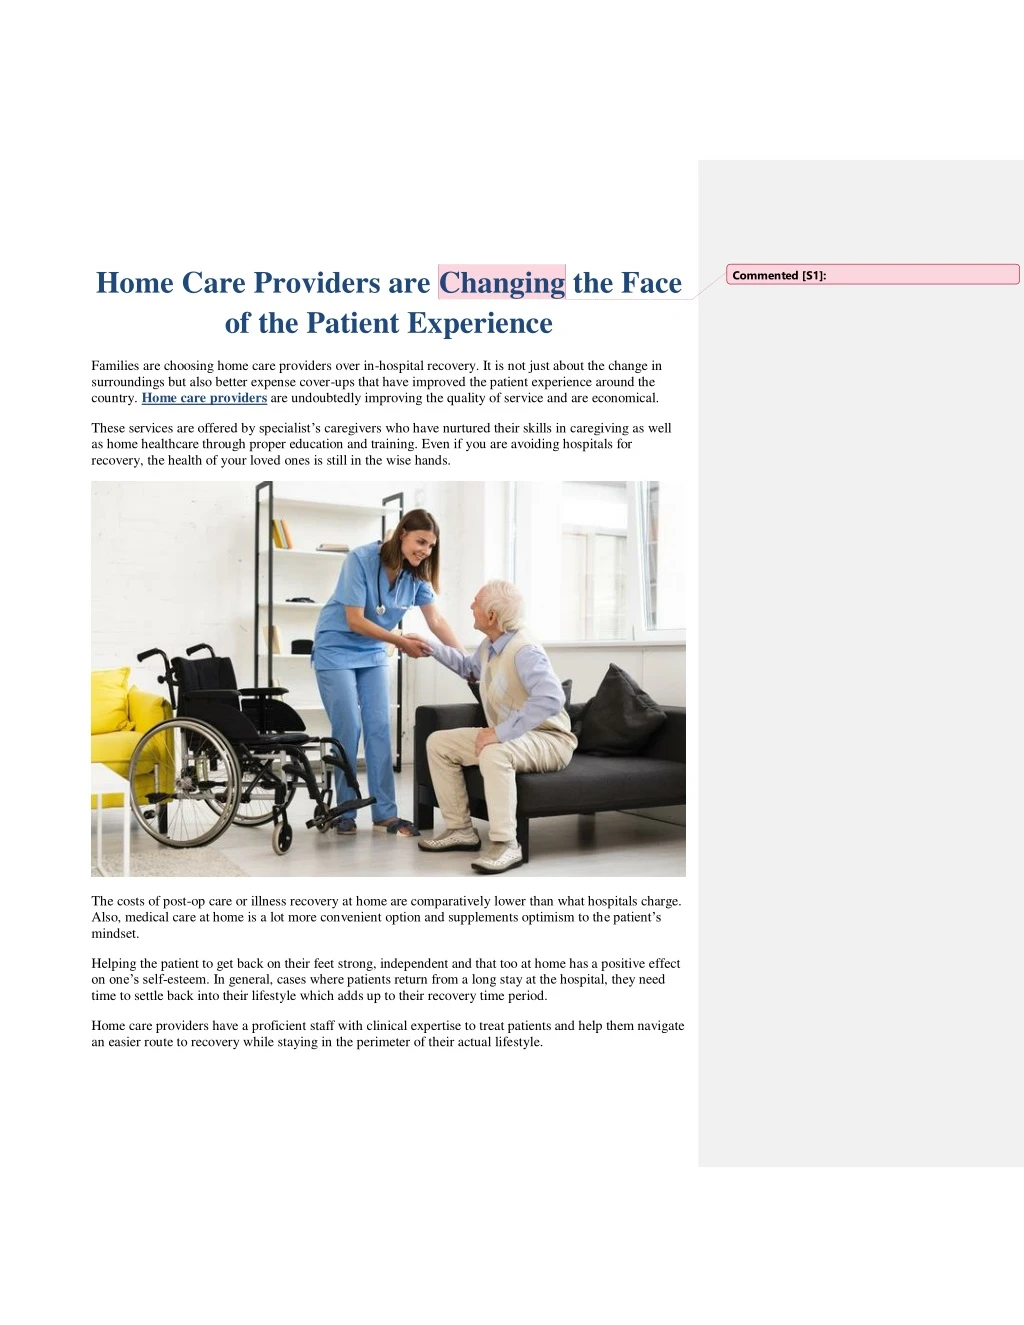 home care providers are changing the face